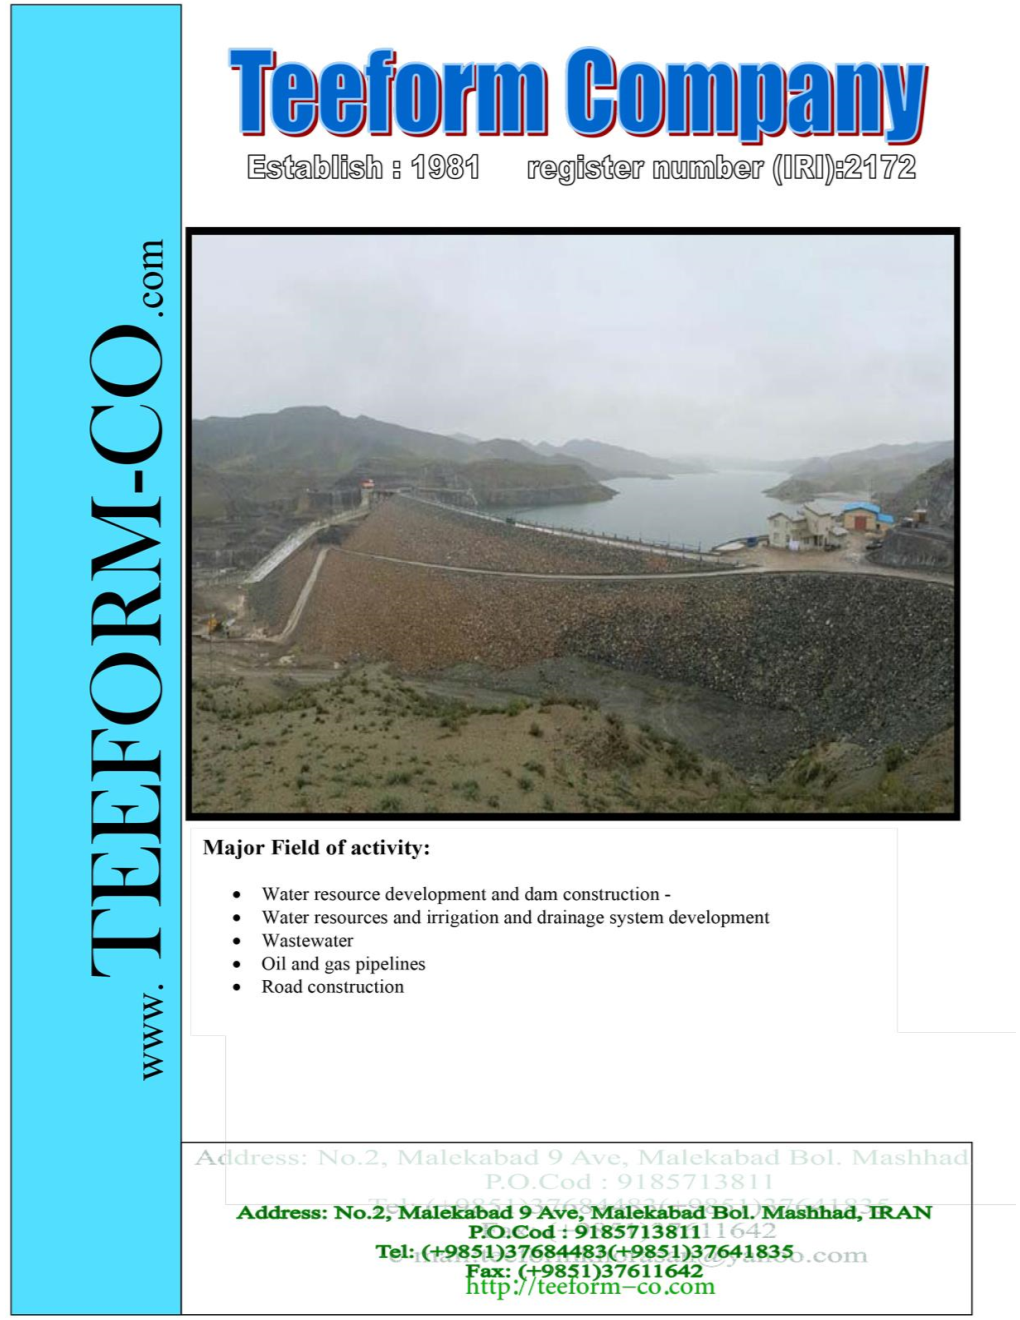 Dam Construction Utilization of the Irrigation and Drainage System Water Resources and Irrigation System Development SCADA